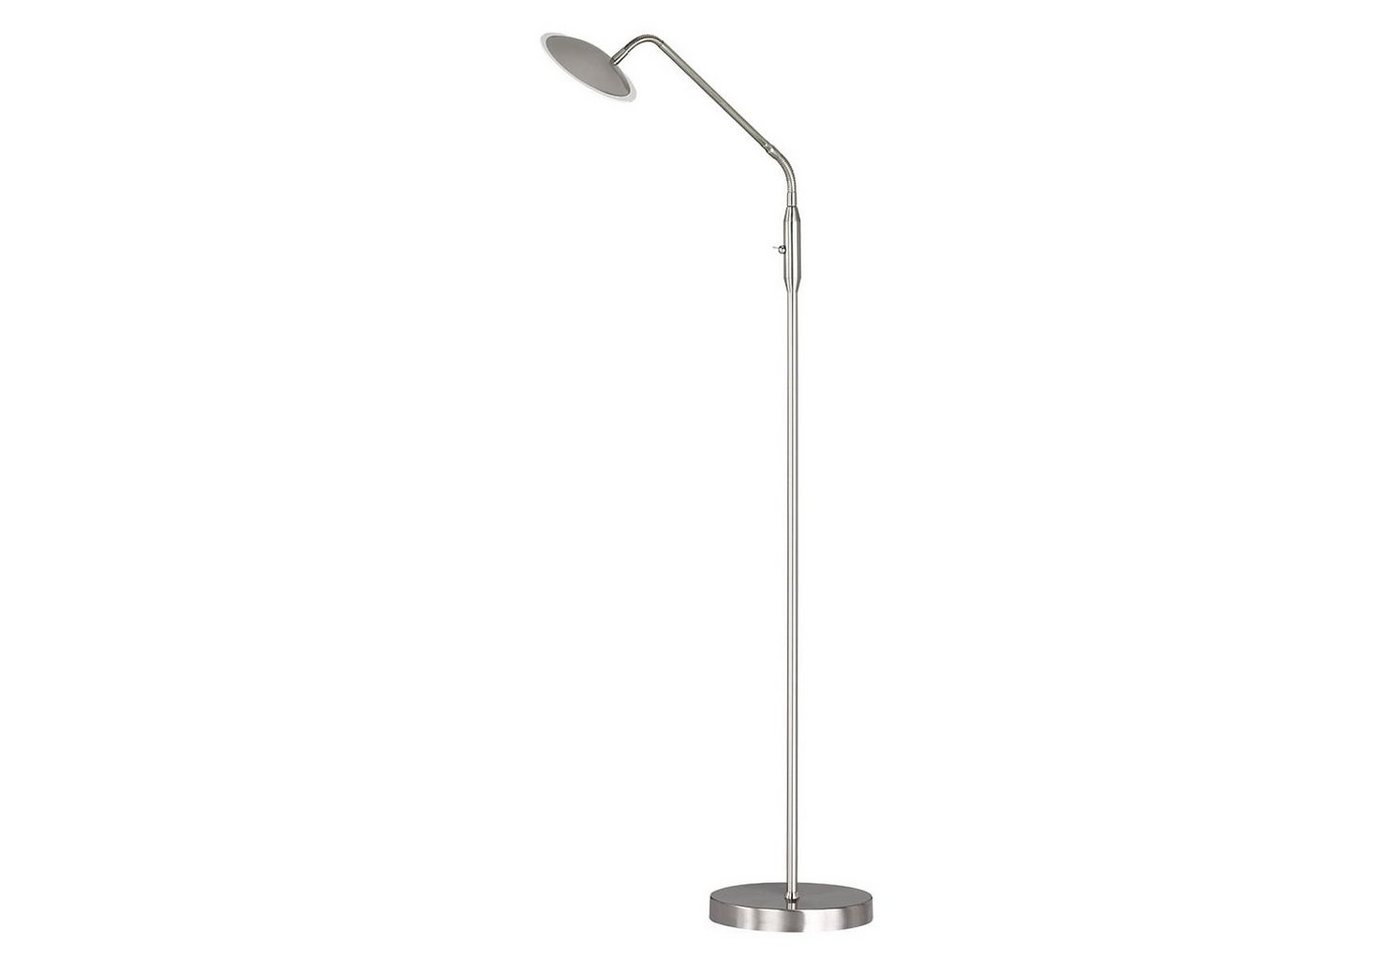 Home4Living Stehlampe Stehlampe Stehleuchte Dimmbar Chrom 12W von Home4Living